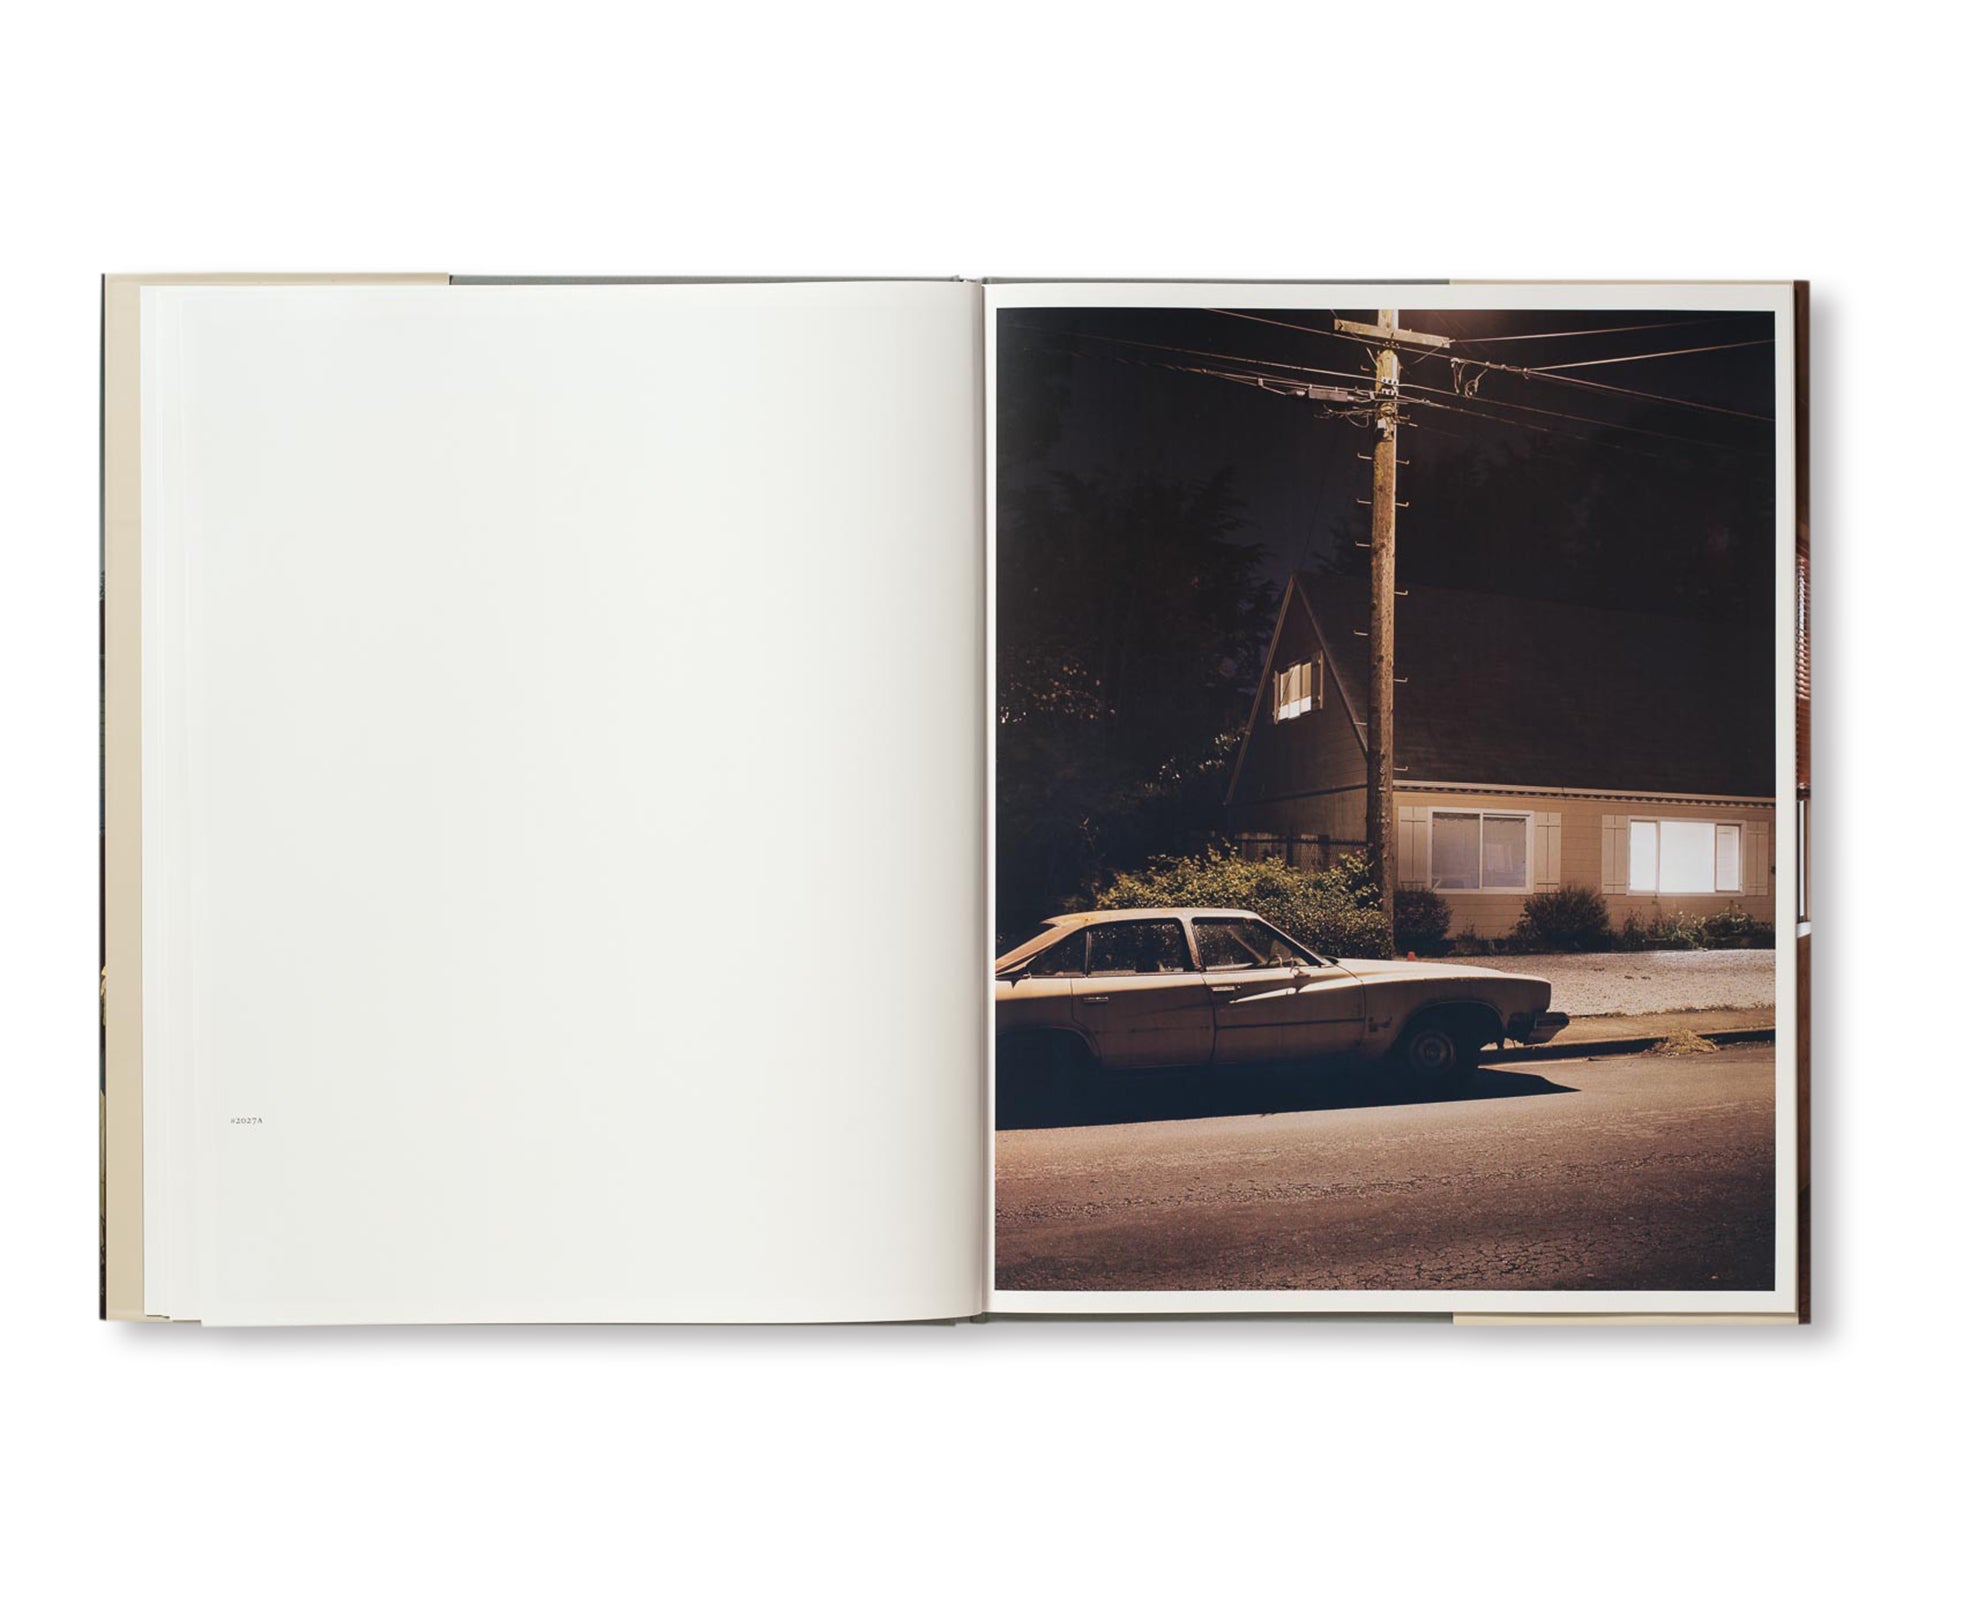 HOUSE HUNTING by Todd Hido